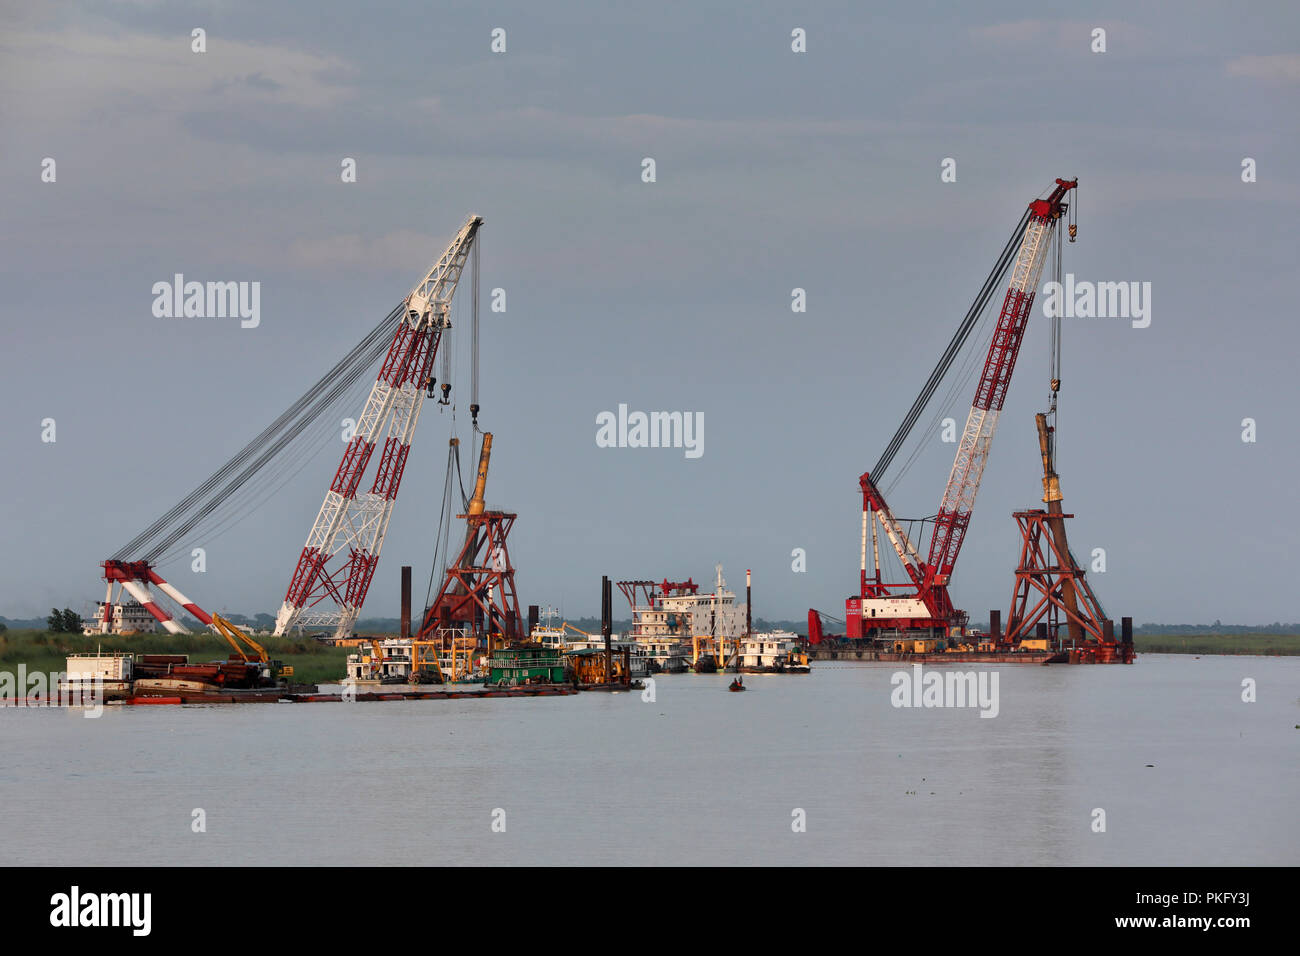 Shariatpur, Bangladesh - September 10, 2018: The Padma Bridge construction work is going on breaking all barriers and efforts are on to complete the w Stock Photo